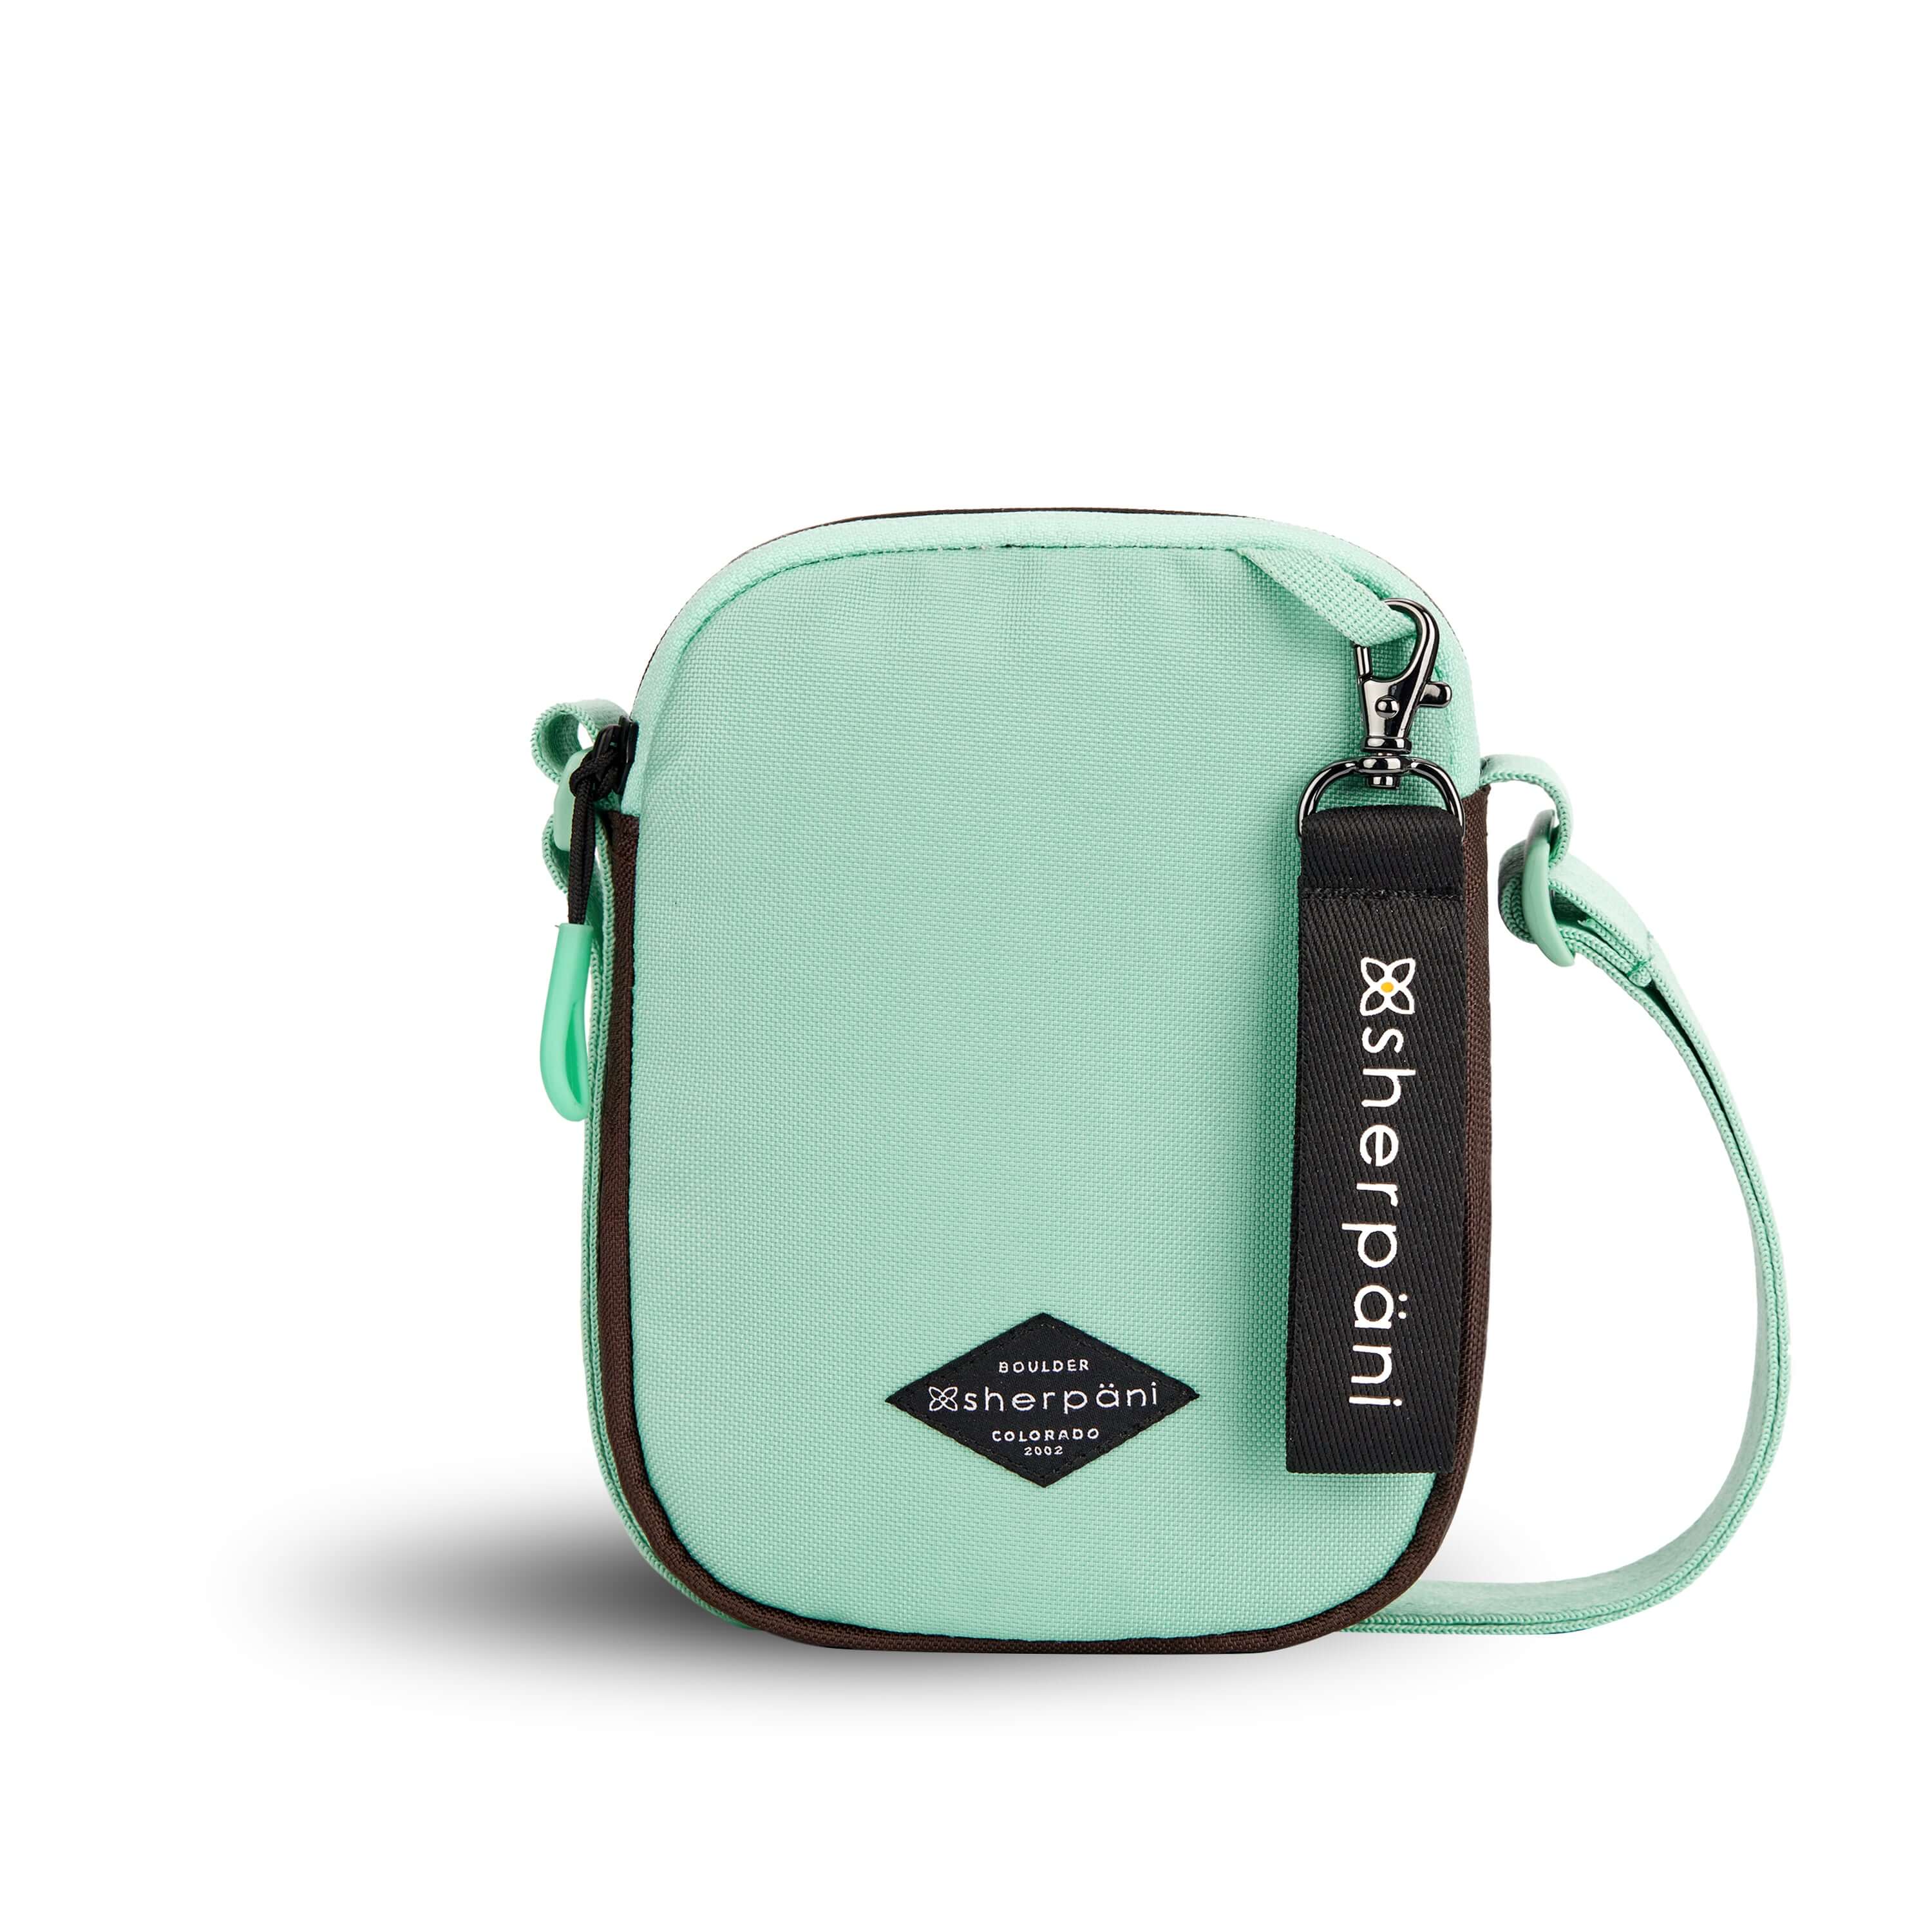 Flat front view of Sherpani crossbody, the Rogue in Seagreen. The bag is two toned: the front is light green and the back is brown. The main zipper compartment features an easy-pull zipper accented in light green. The bag has an adjustable crossbody strap. A branded Sherpani keychain is clipped to a fabric loop on the top right corner.